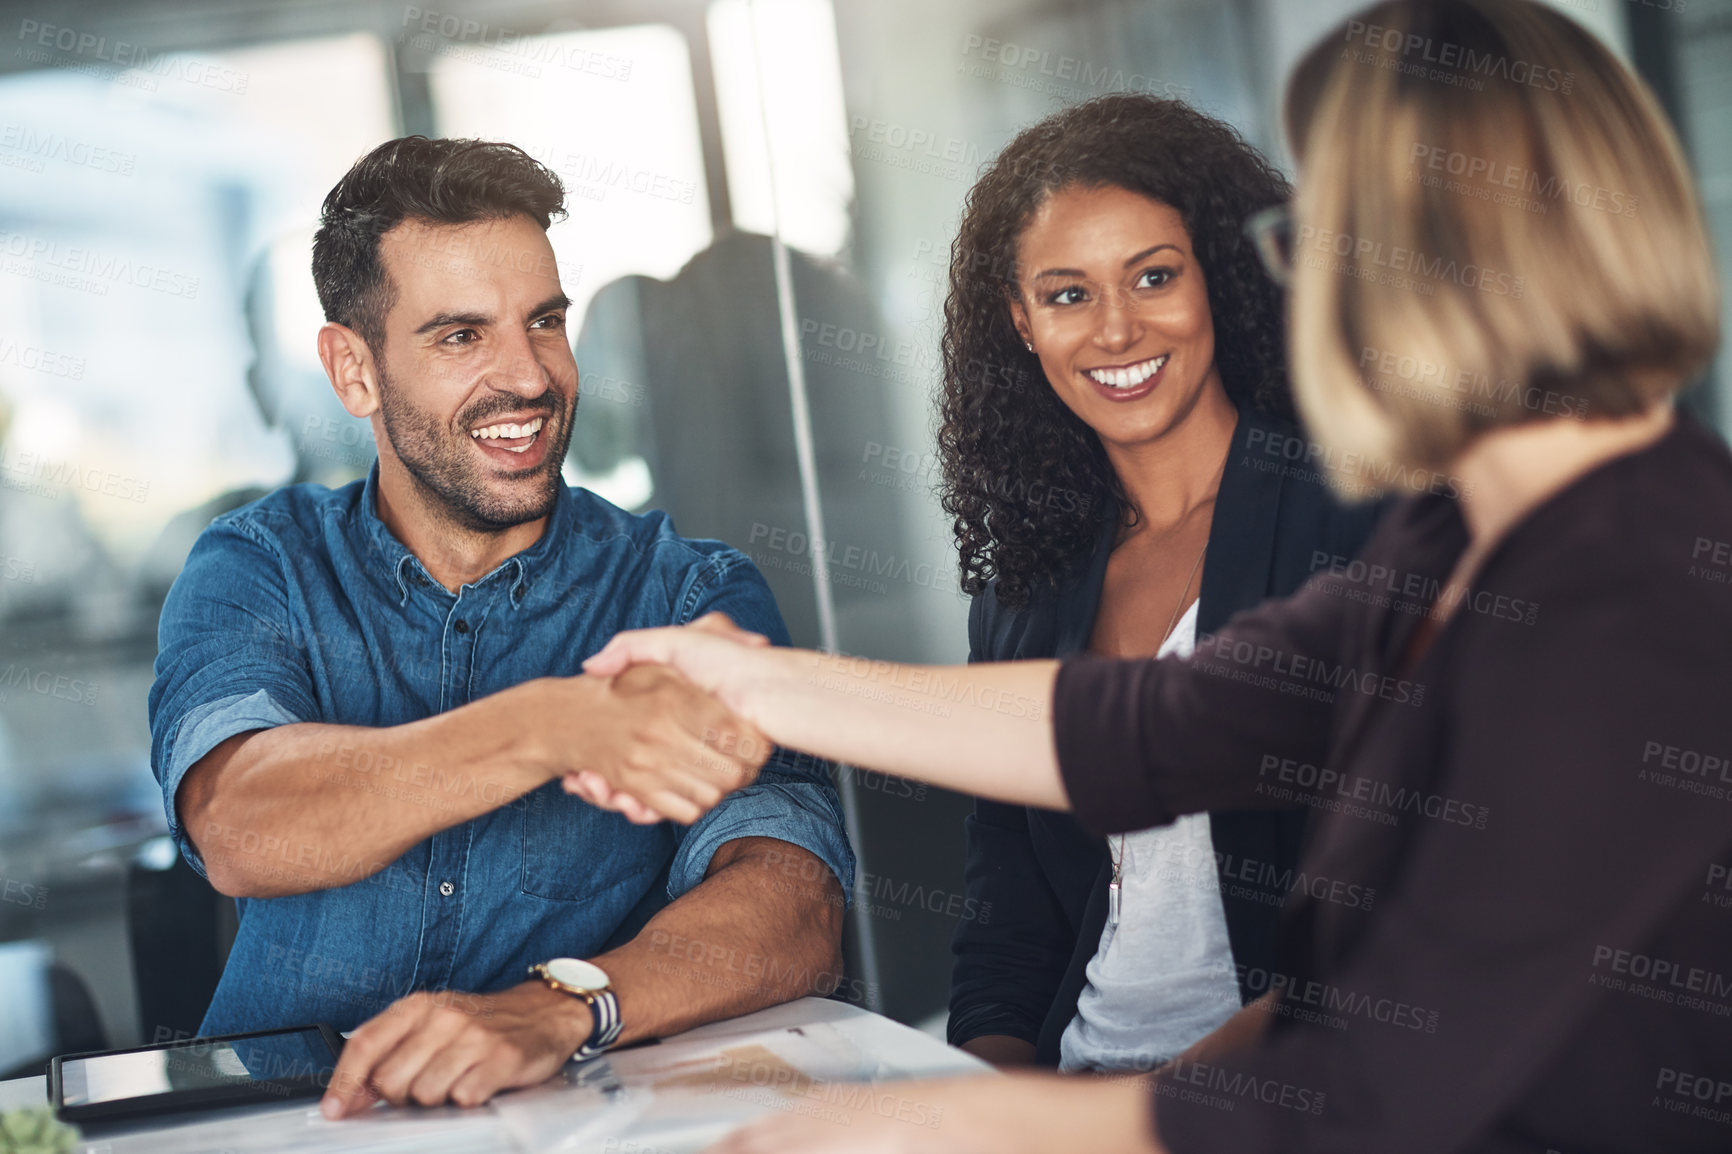 Buy stock photo Handshake and teamwork by business people, colleagues and coworkers in a meeting, discussion or negotiating at work. Corporate professionals greet, make a deal and collaborate in an office boardroom